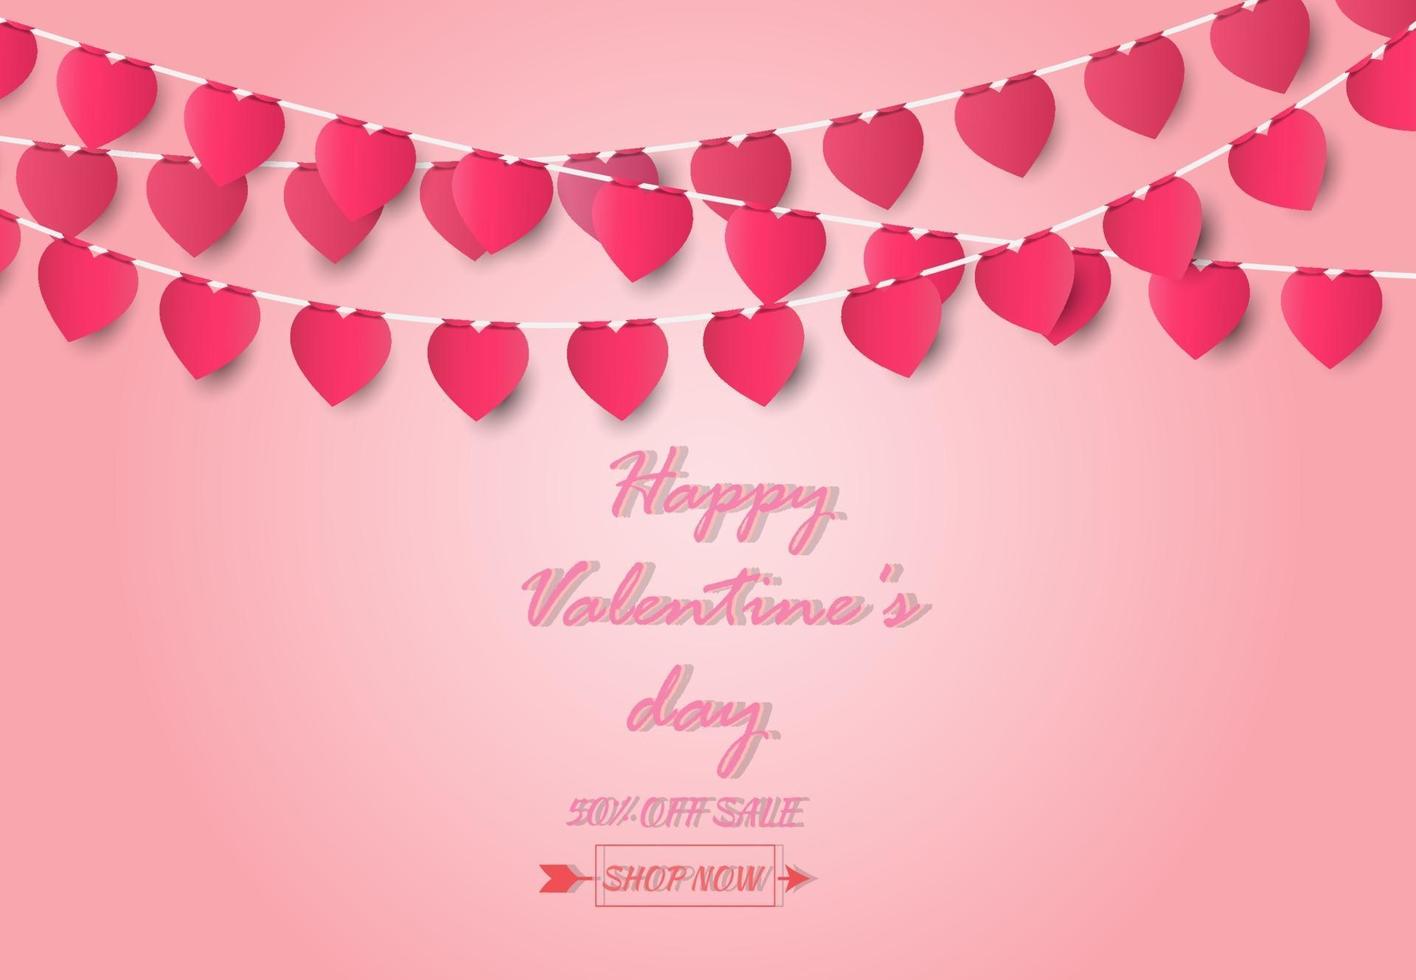 Valentine's day greeting card and love concept with heart shape on pink background, Paper art style. vector